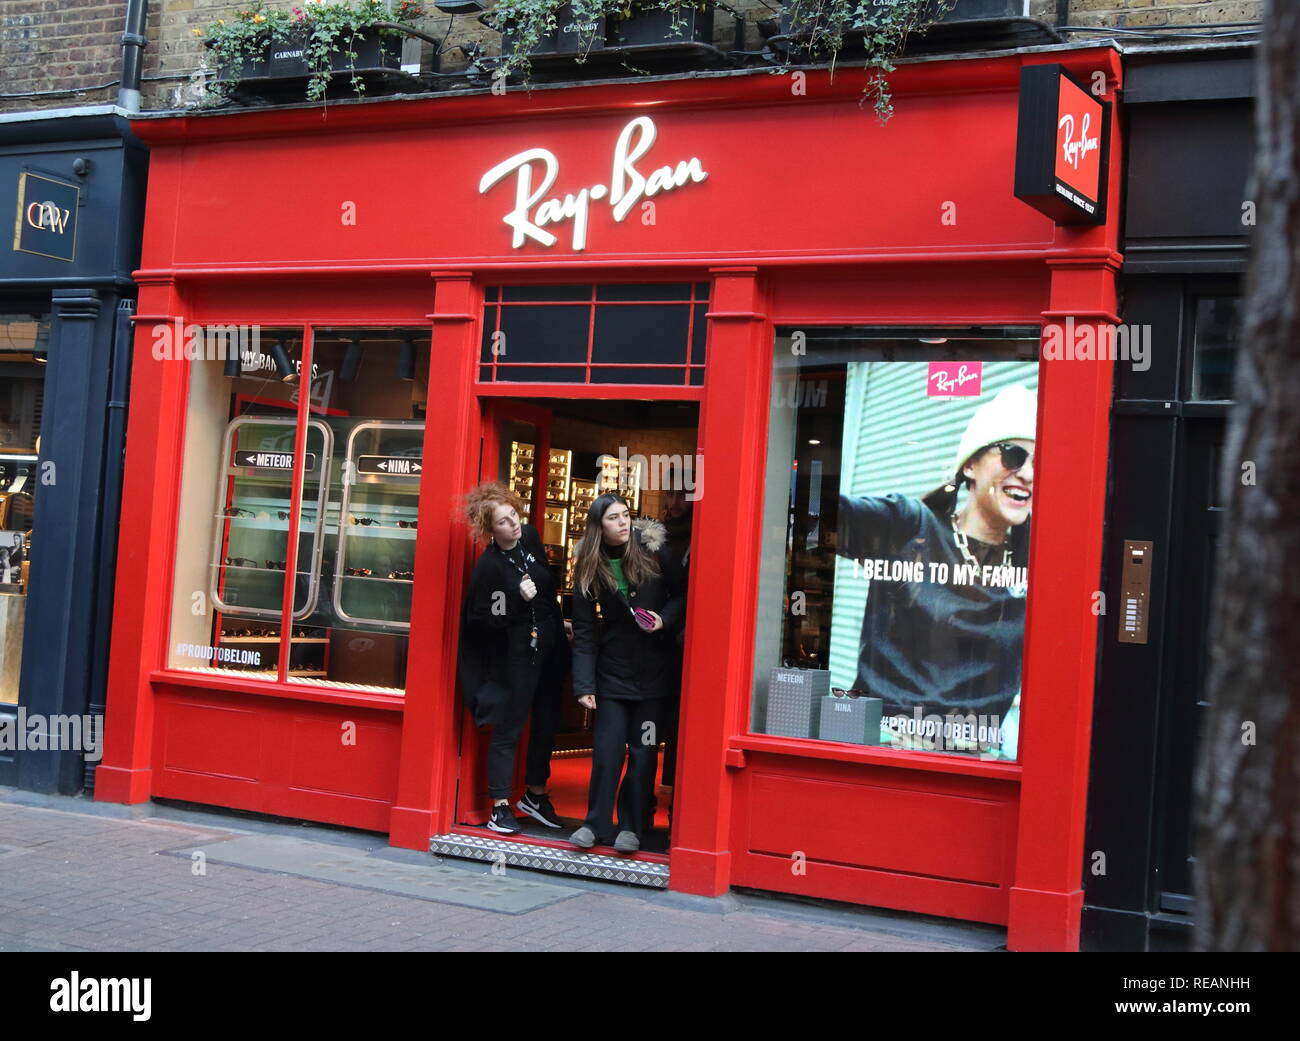 Ray-Ban brand logo seen in Carnaby 